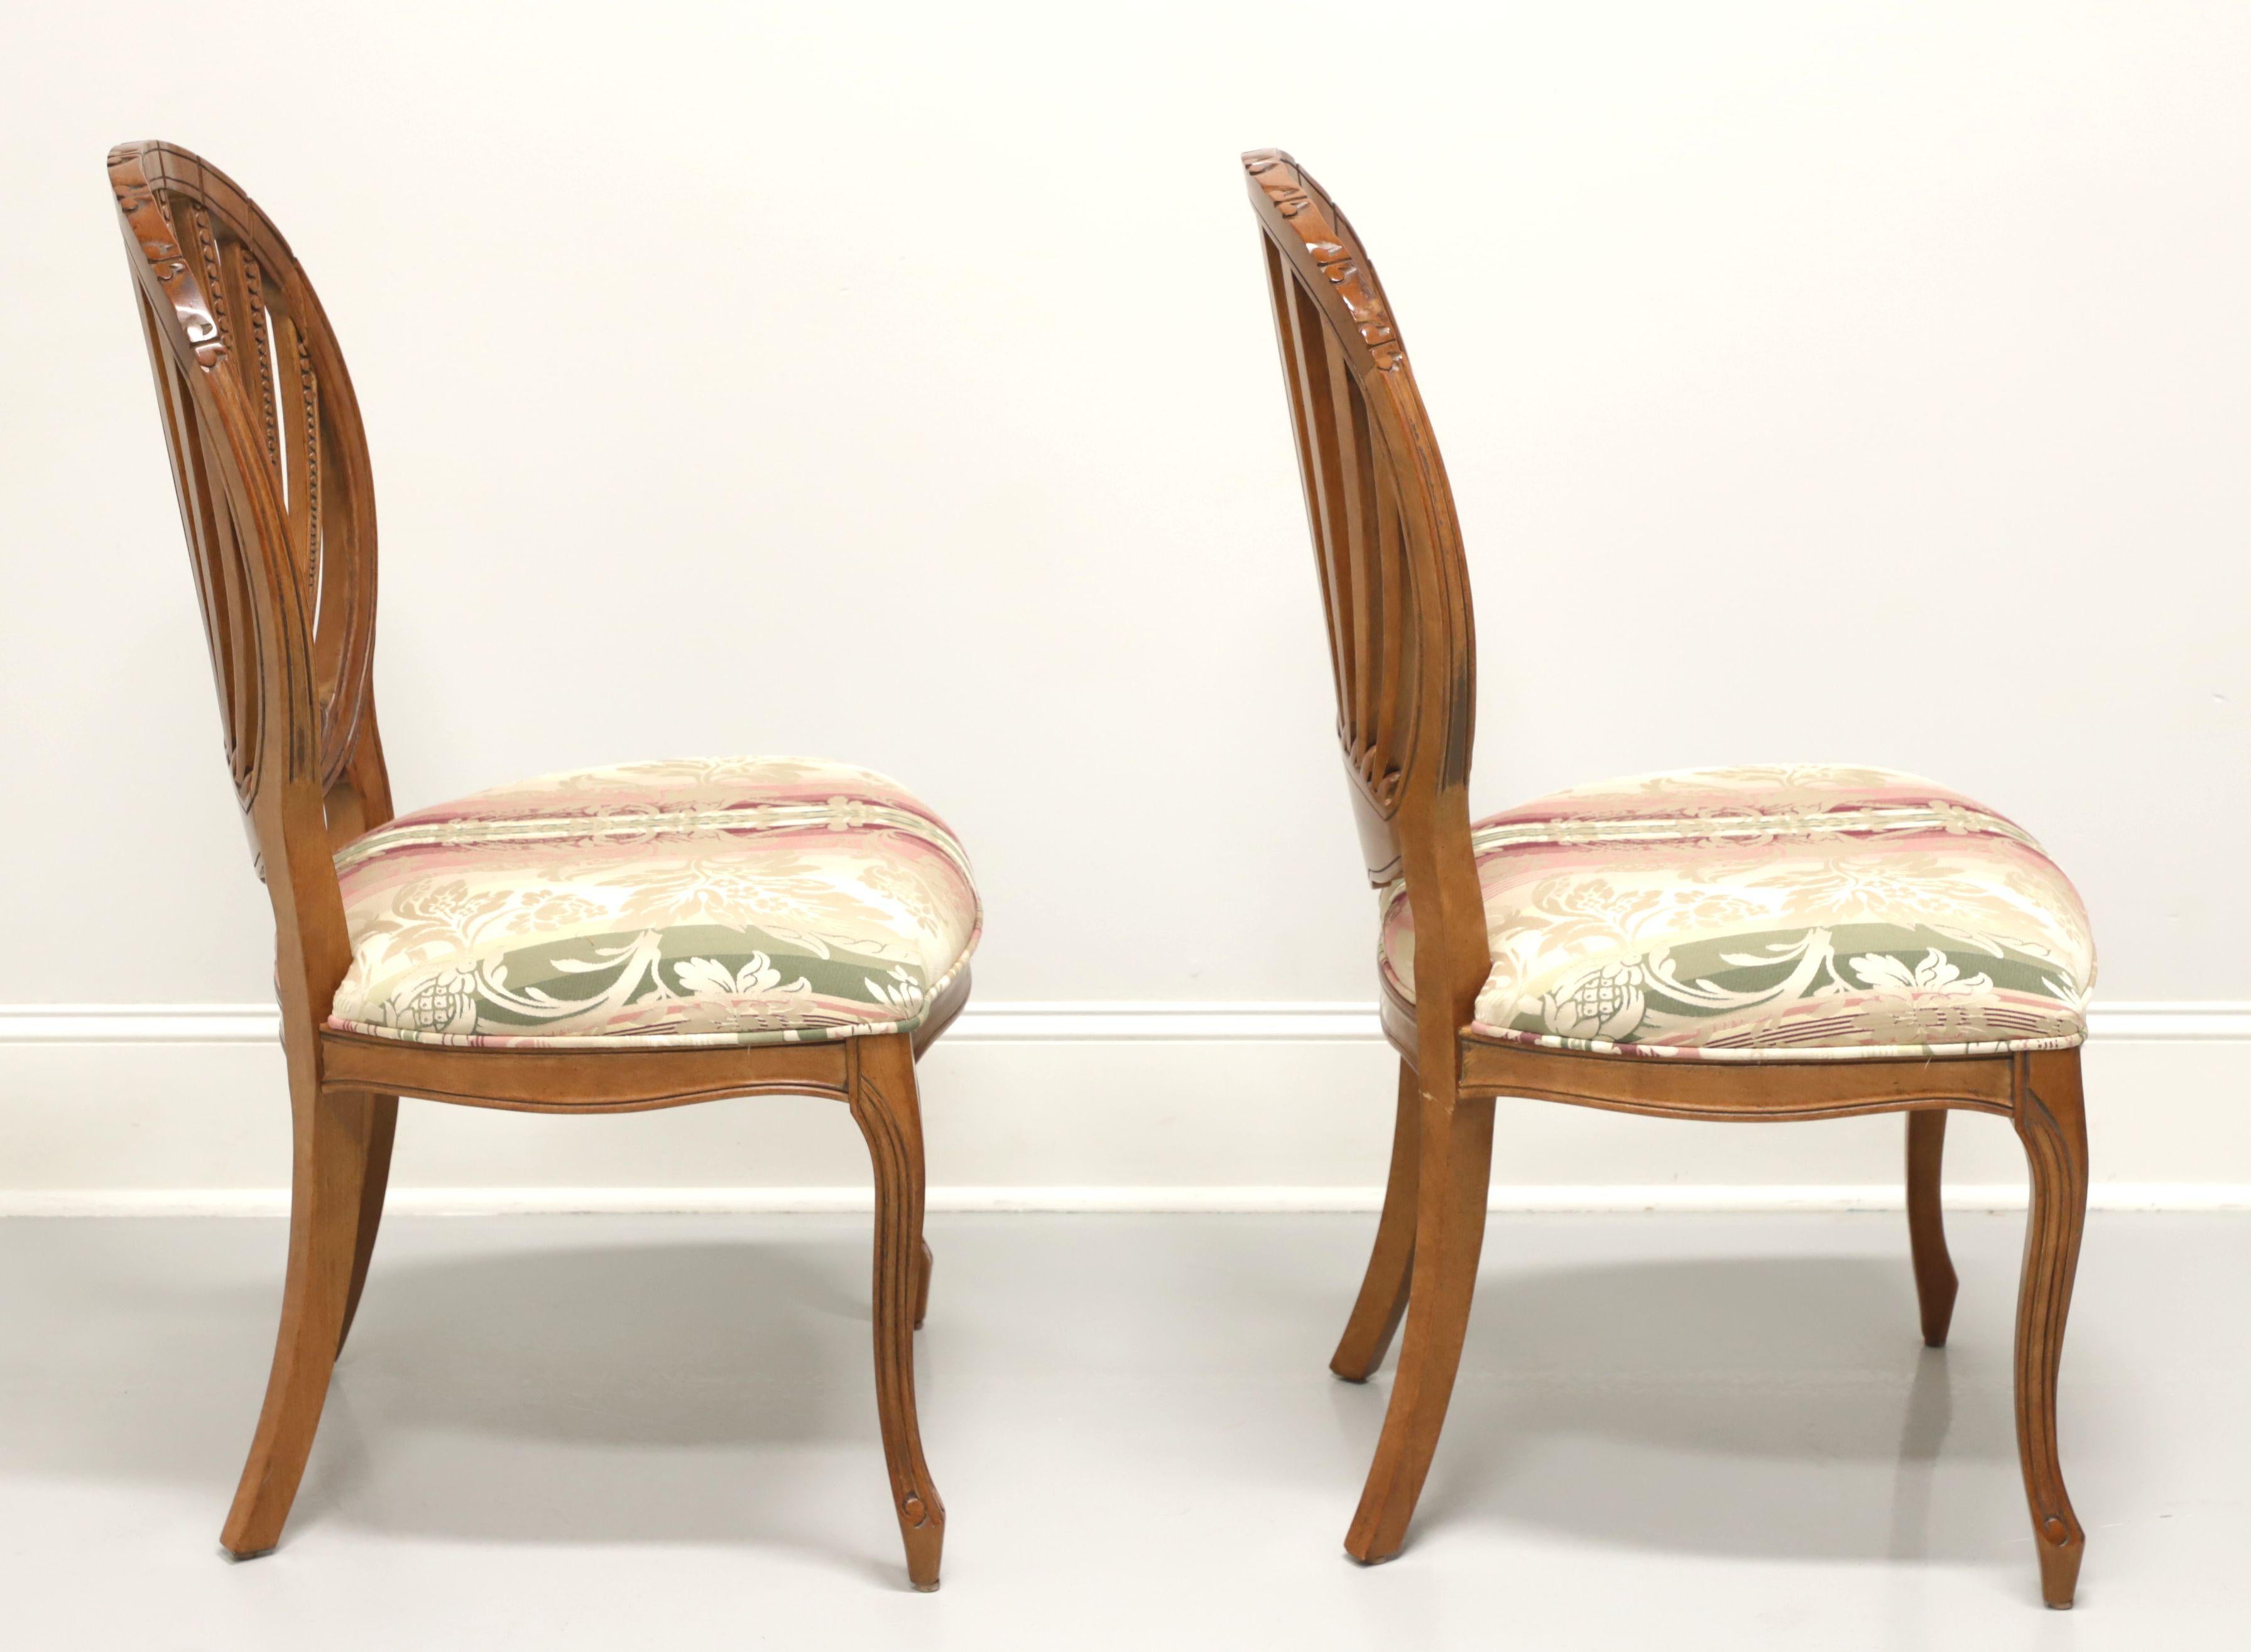 CENTURY French Country Oval Back Dining Side Chairs - Paar A (amerikanisch) im Angebot